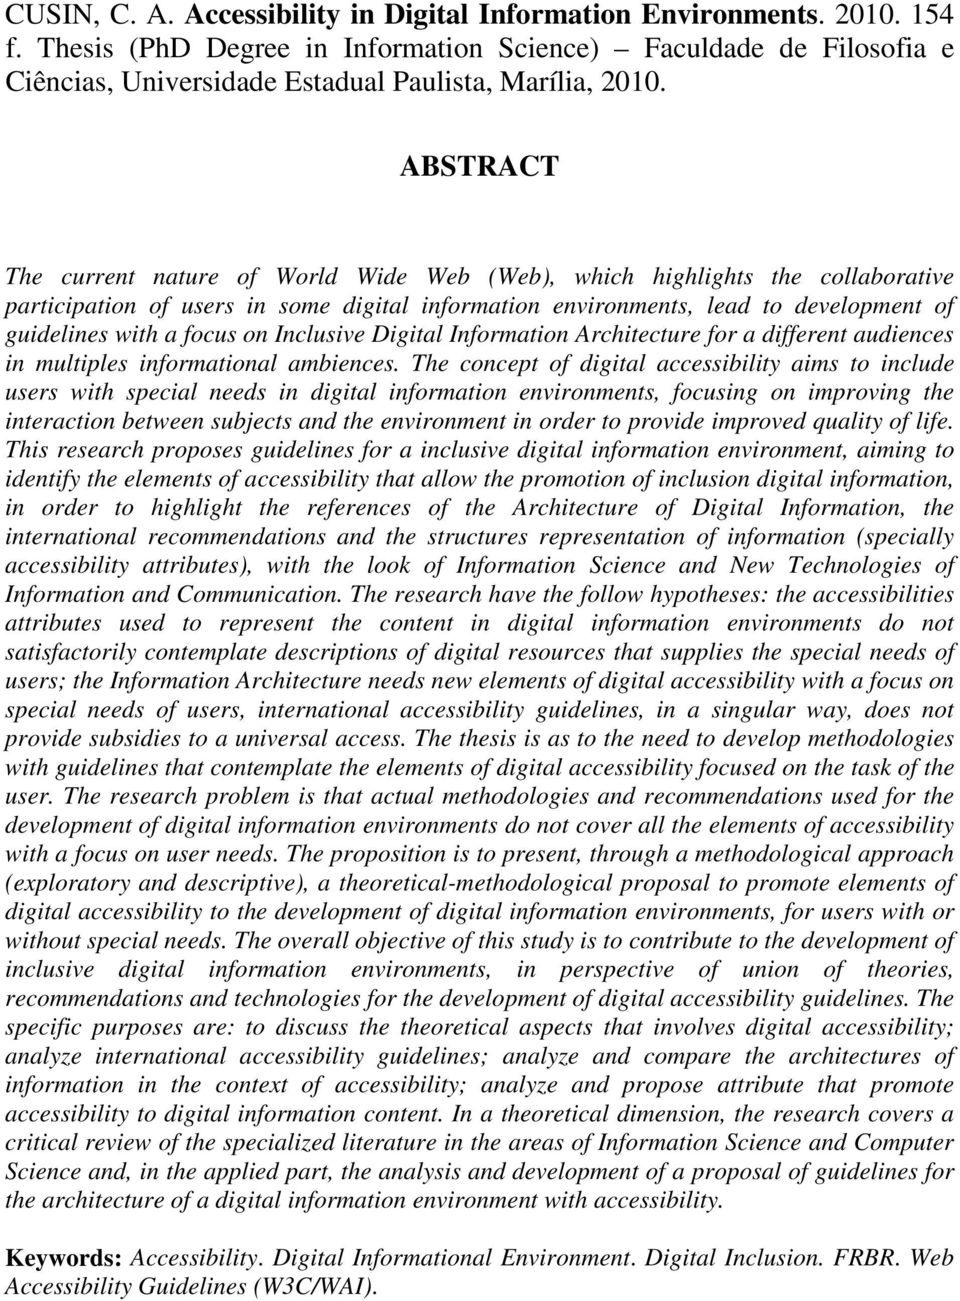 ABSTRACT The current nature of World Wide Web (Web), which highlights the collaborative participation of users in some digital information environments, lead to development of guidelines with a focus